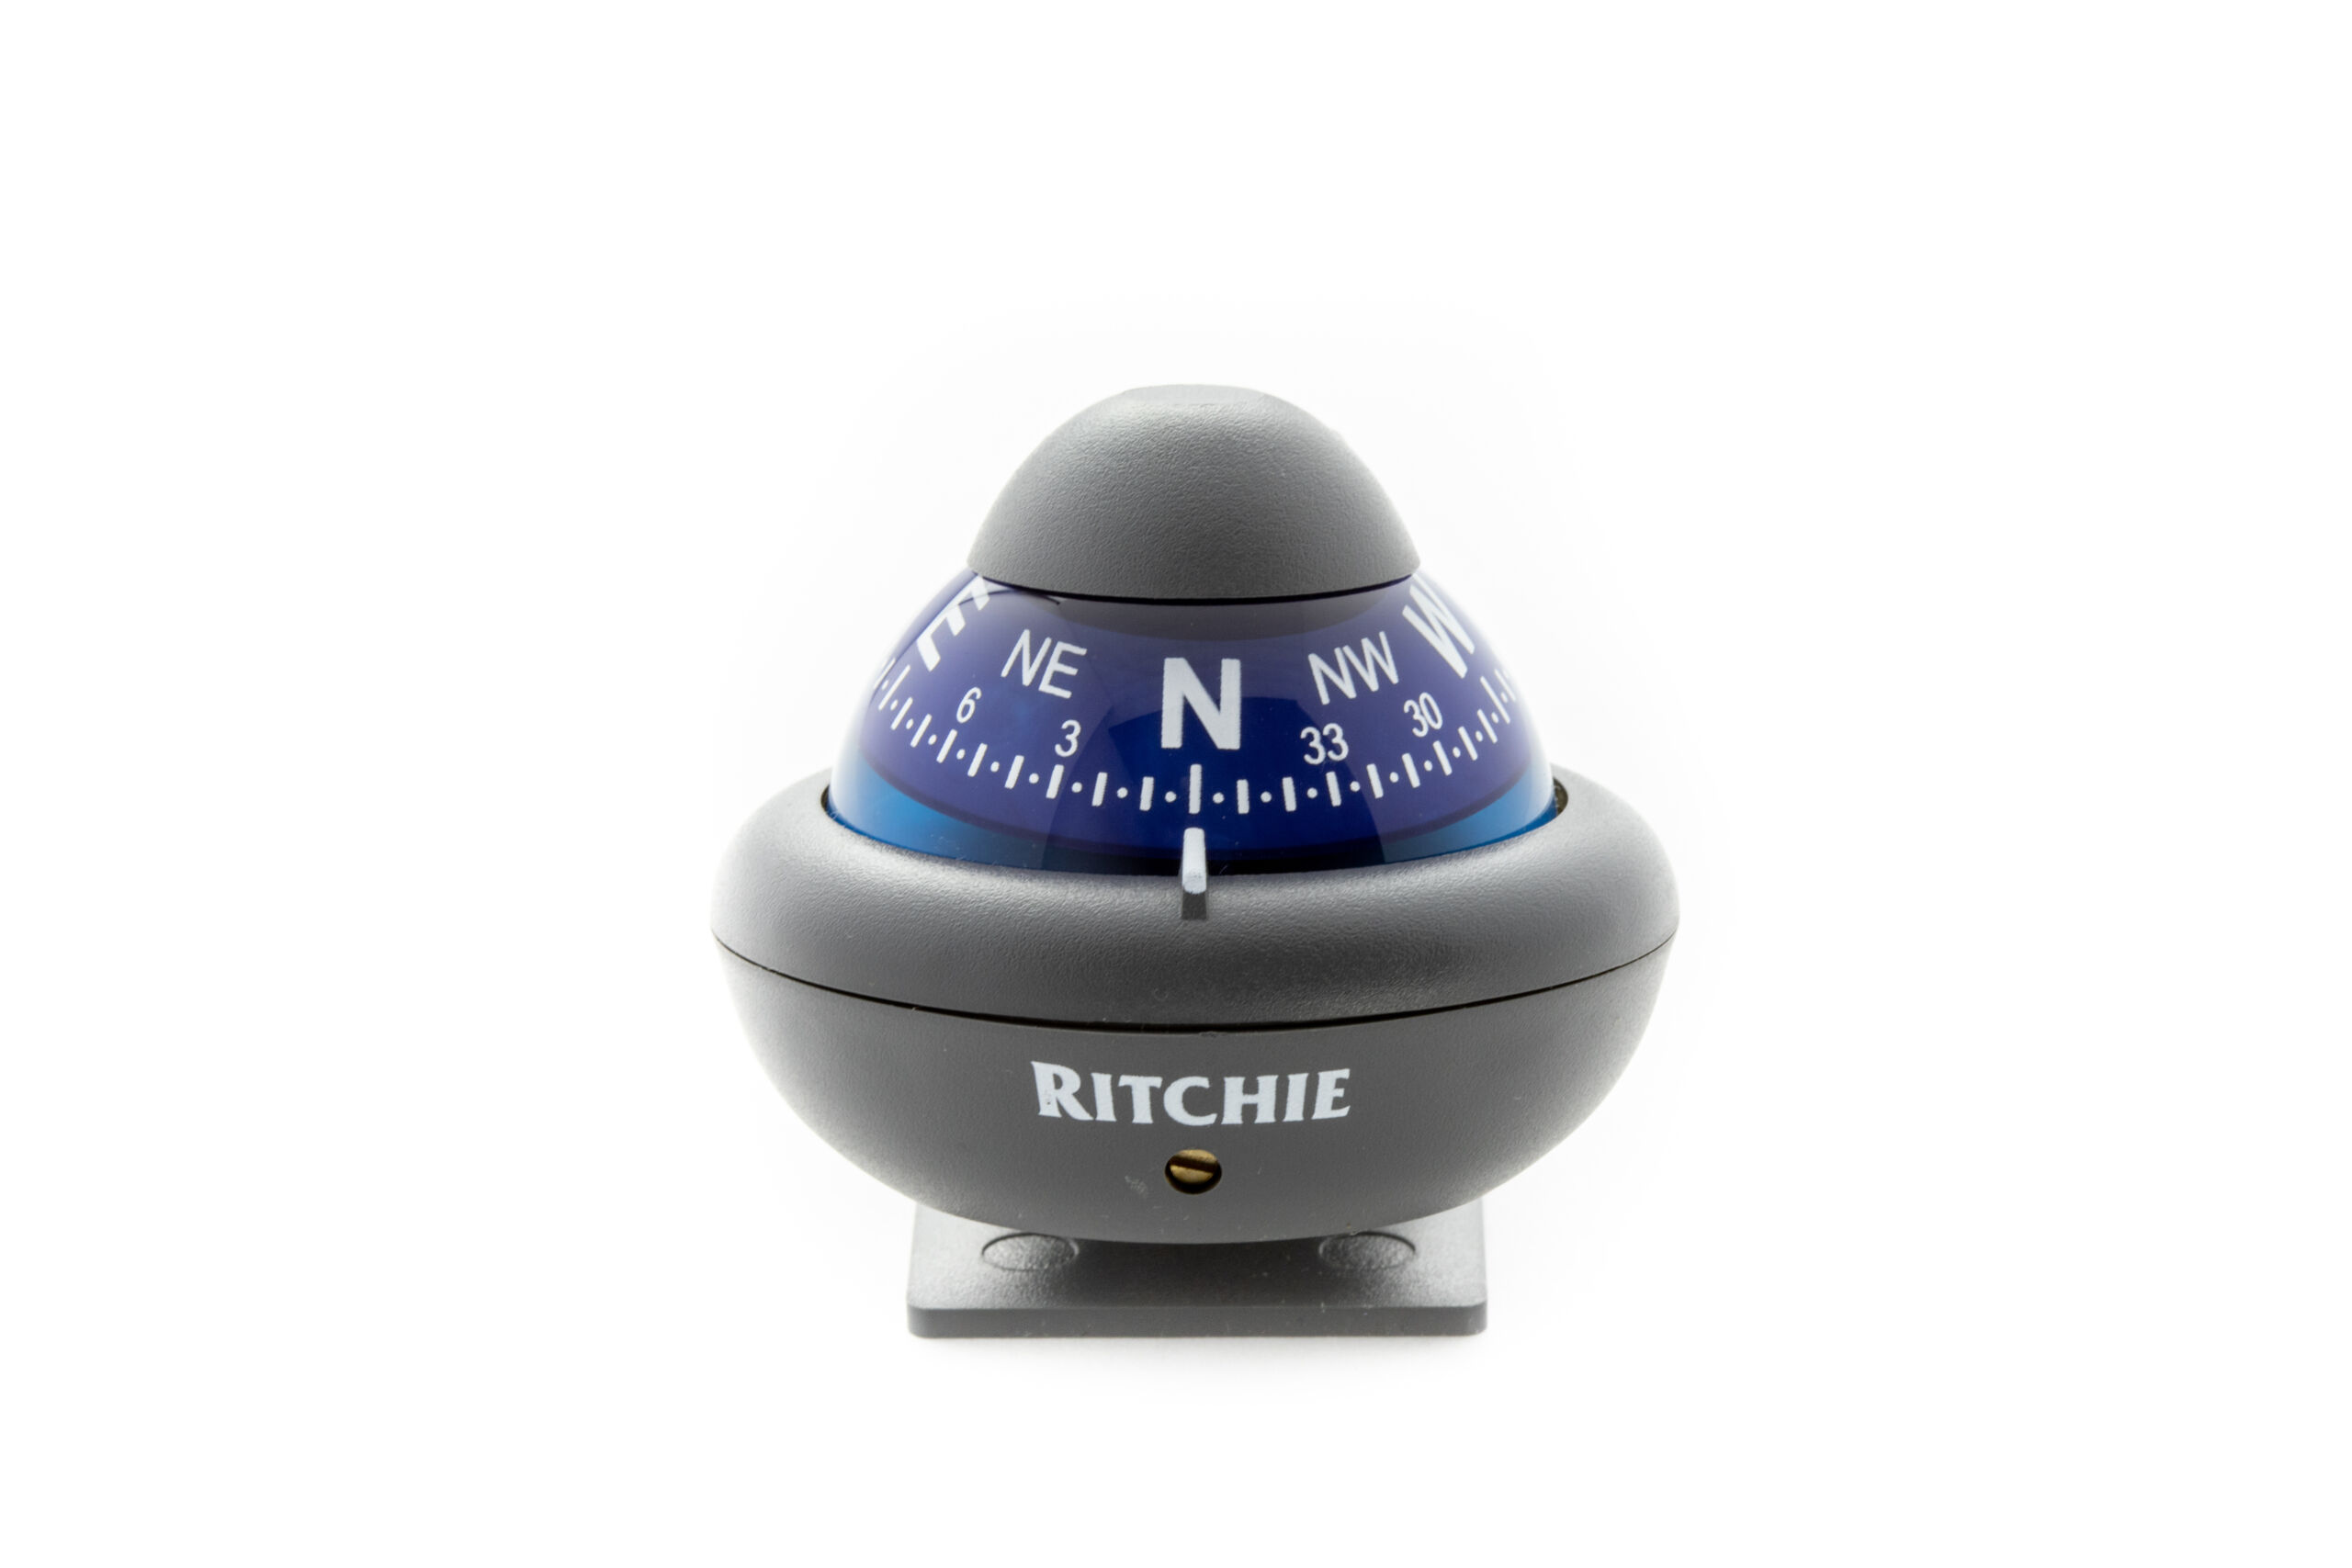 Ritchie RitchieSport White Compass X-10W-M with 12 v light  boat or car navigate 